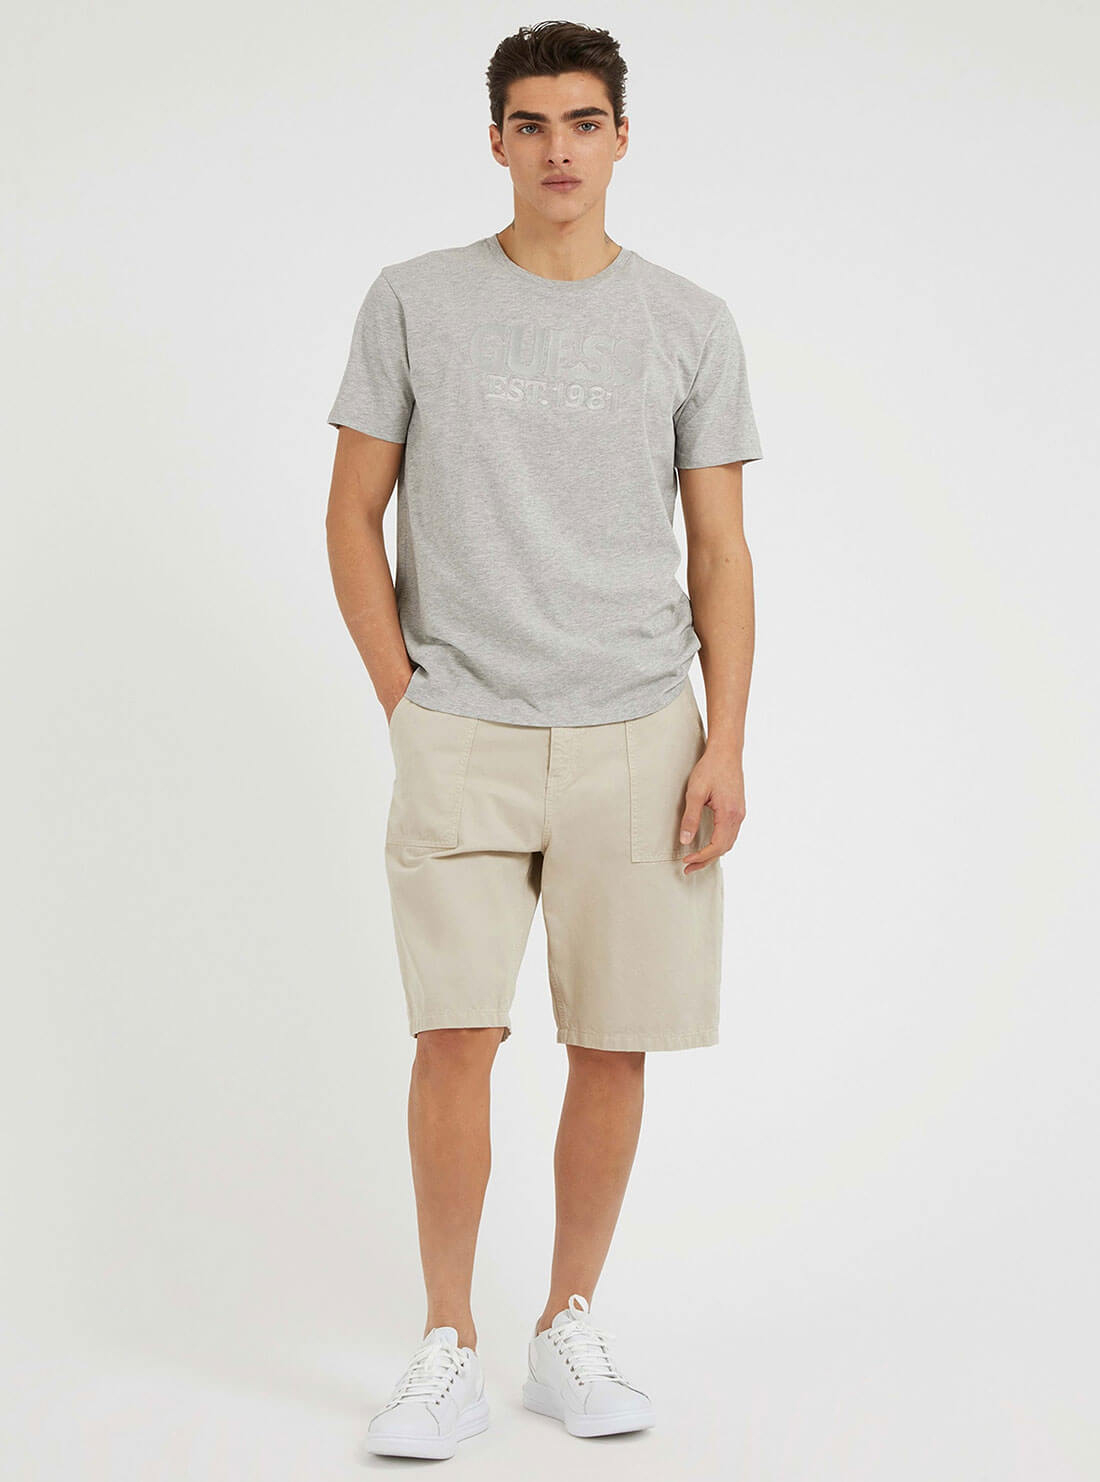 Eco Grey Embroidered Logo T-Shirt | GUESS Men's Apparel | full view